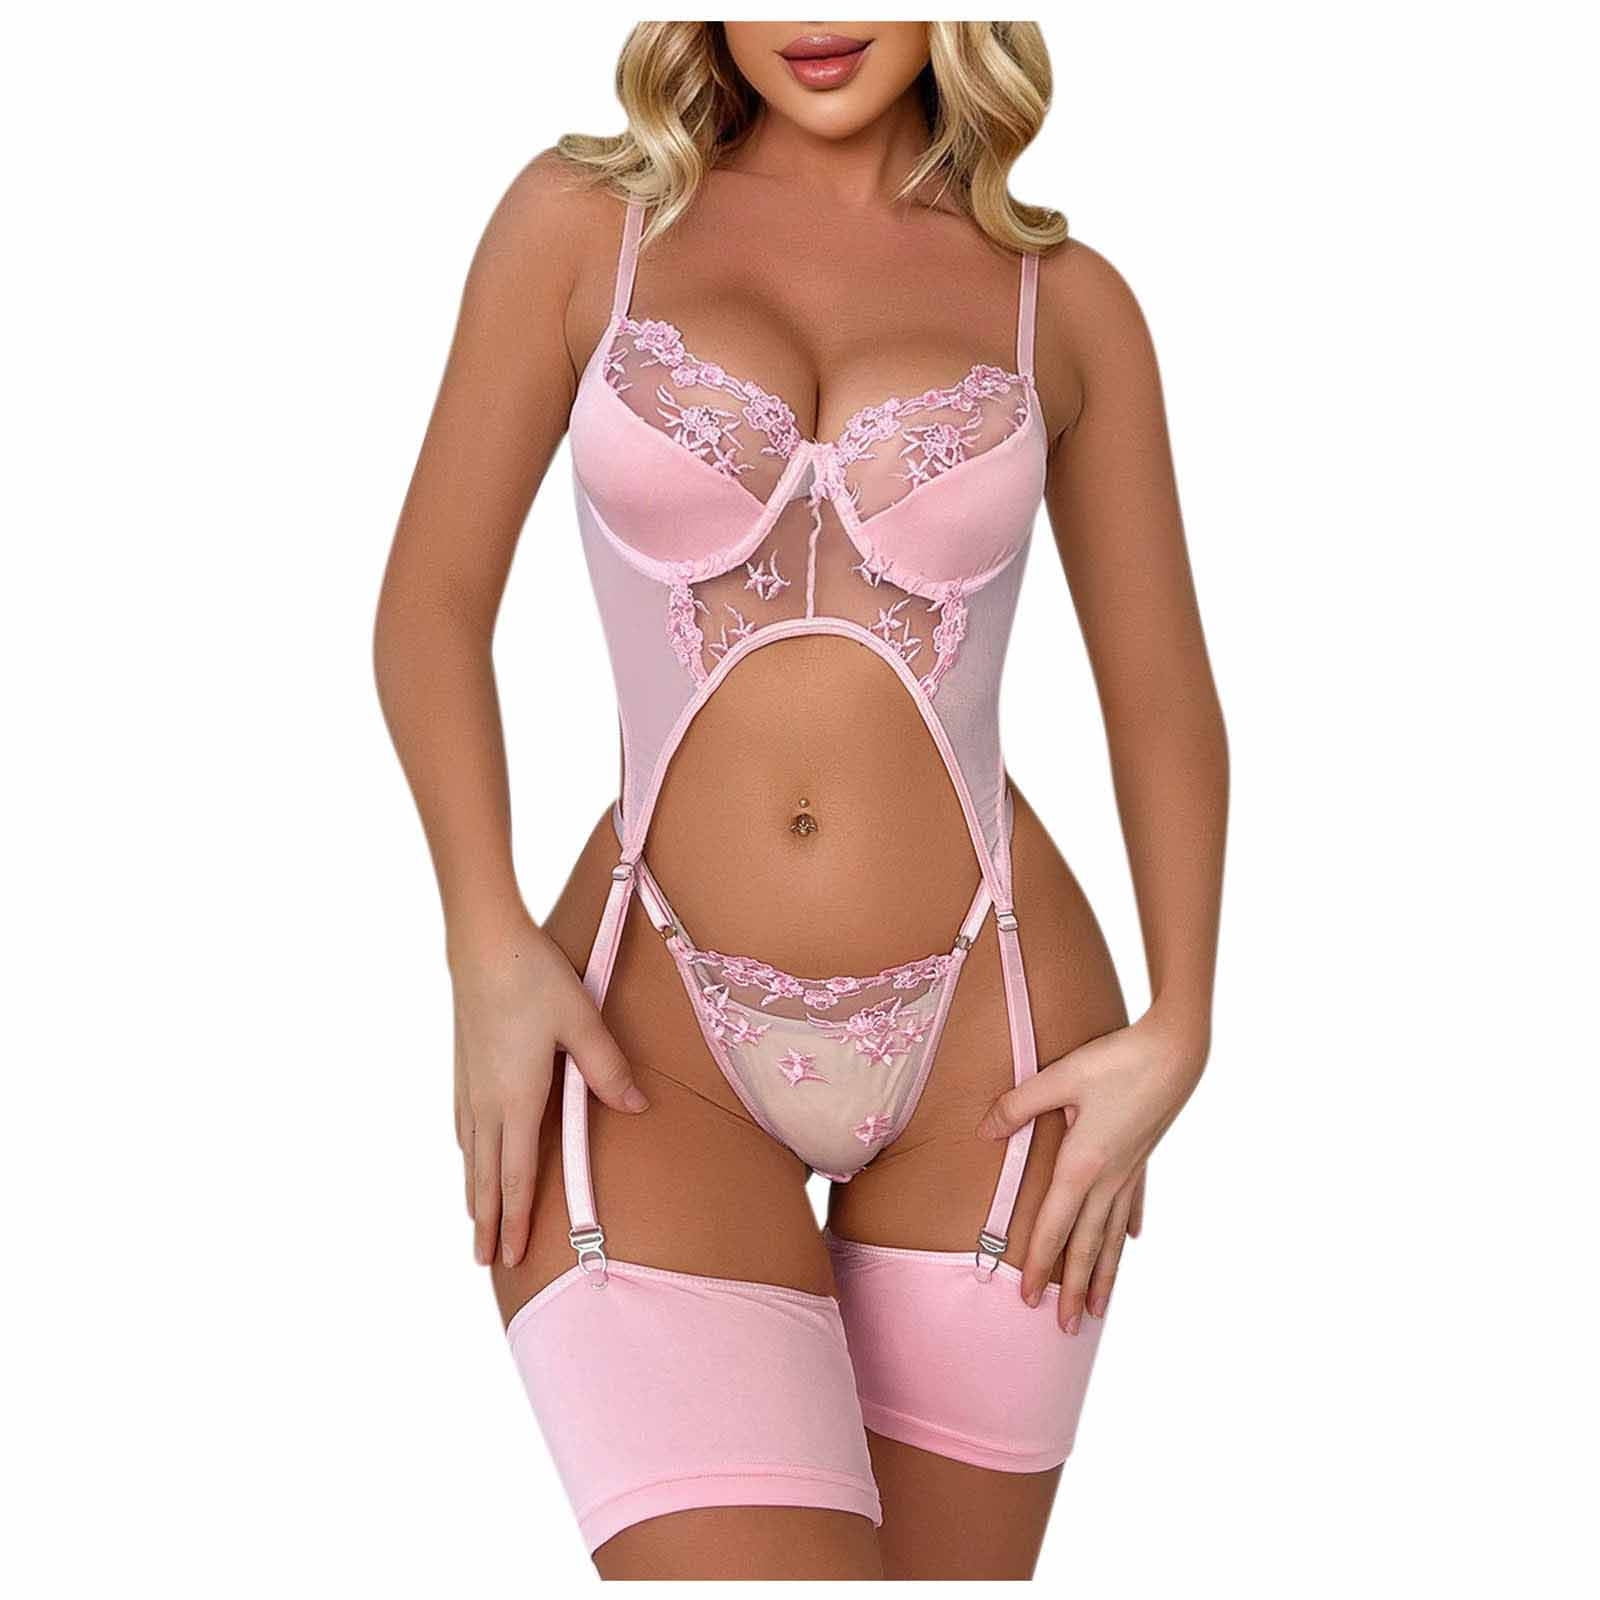 drifting end point master Hfyihgf Womens 3 Piece See-Through Sexy Lingerie Set with Garter Belt  Strappy Floral Lace Bra and Panty Sets Underwear Nightwear(Pink,L) -  Walmart.com